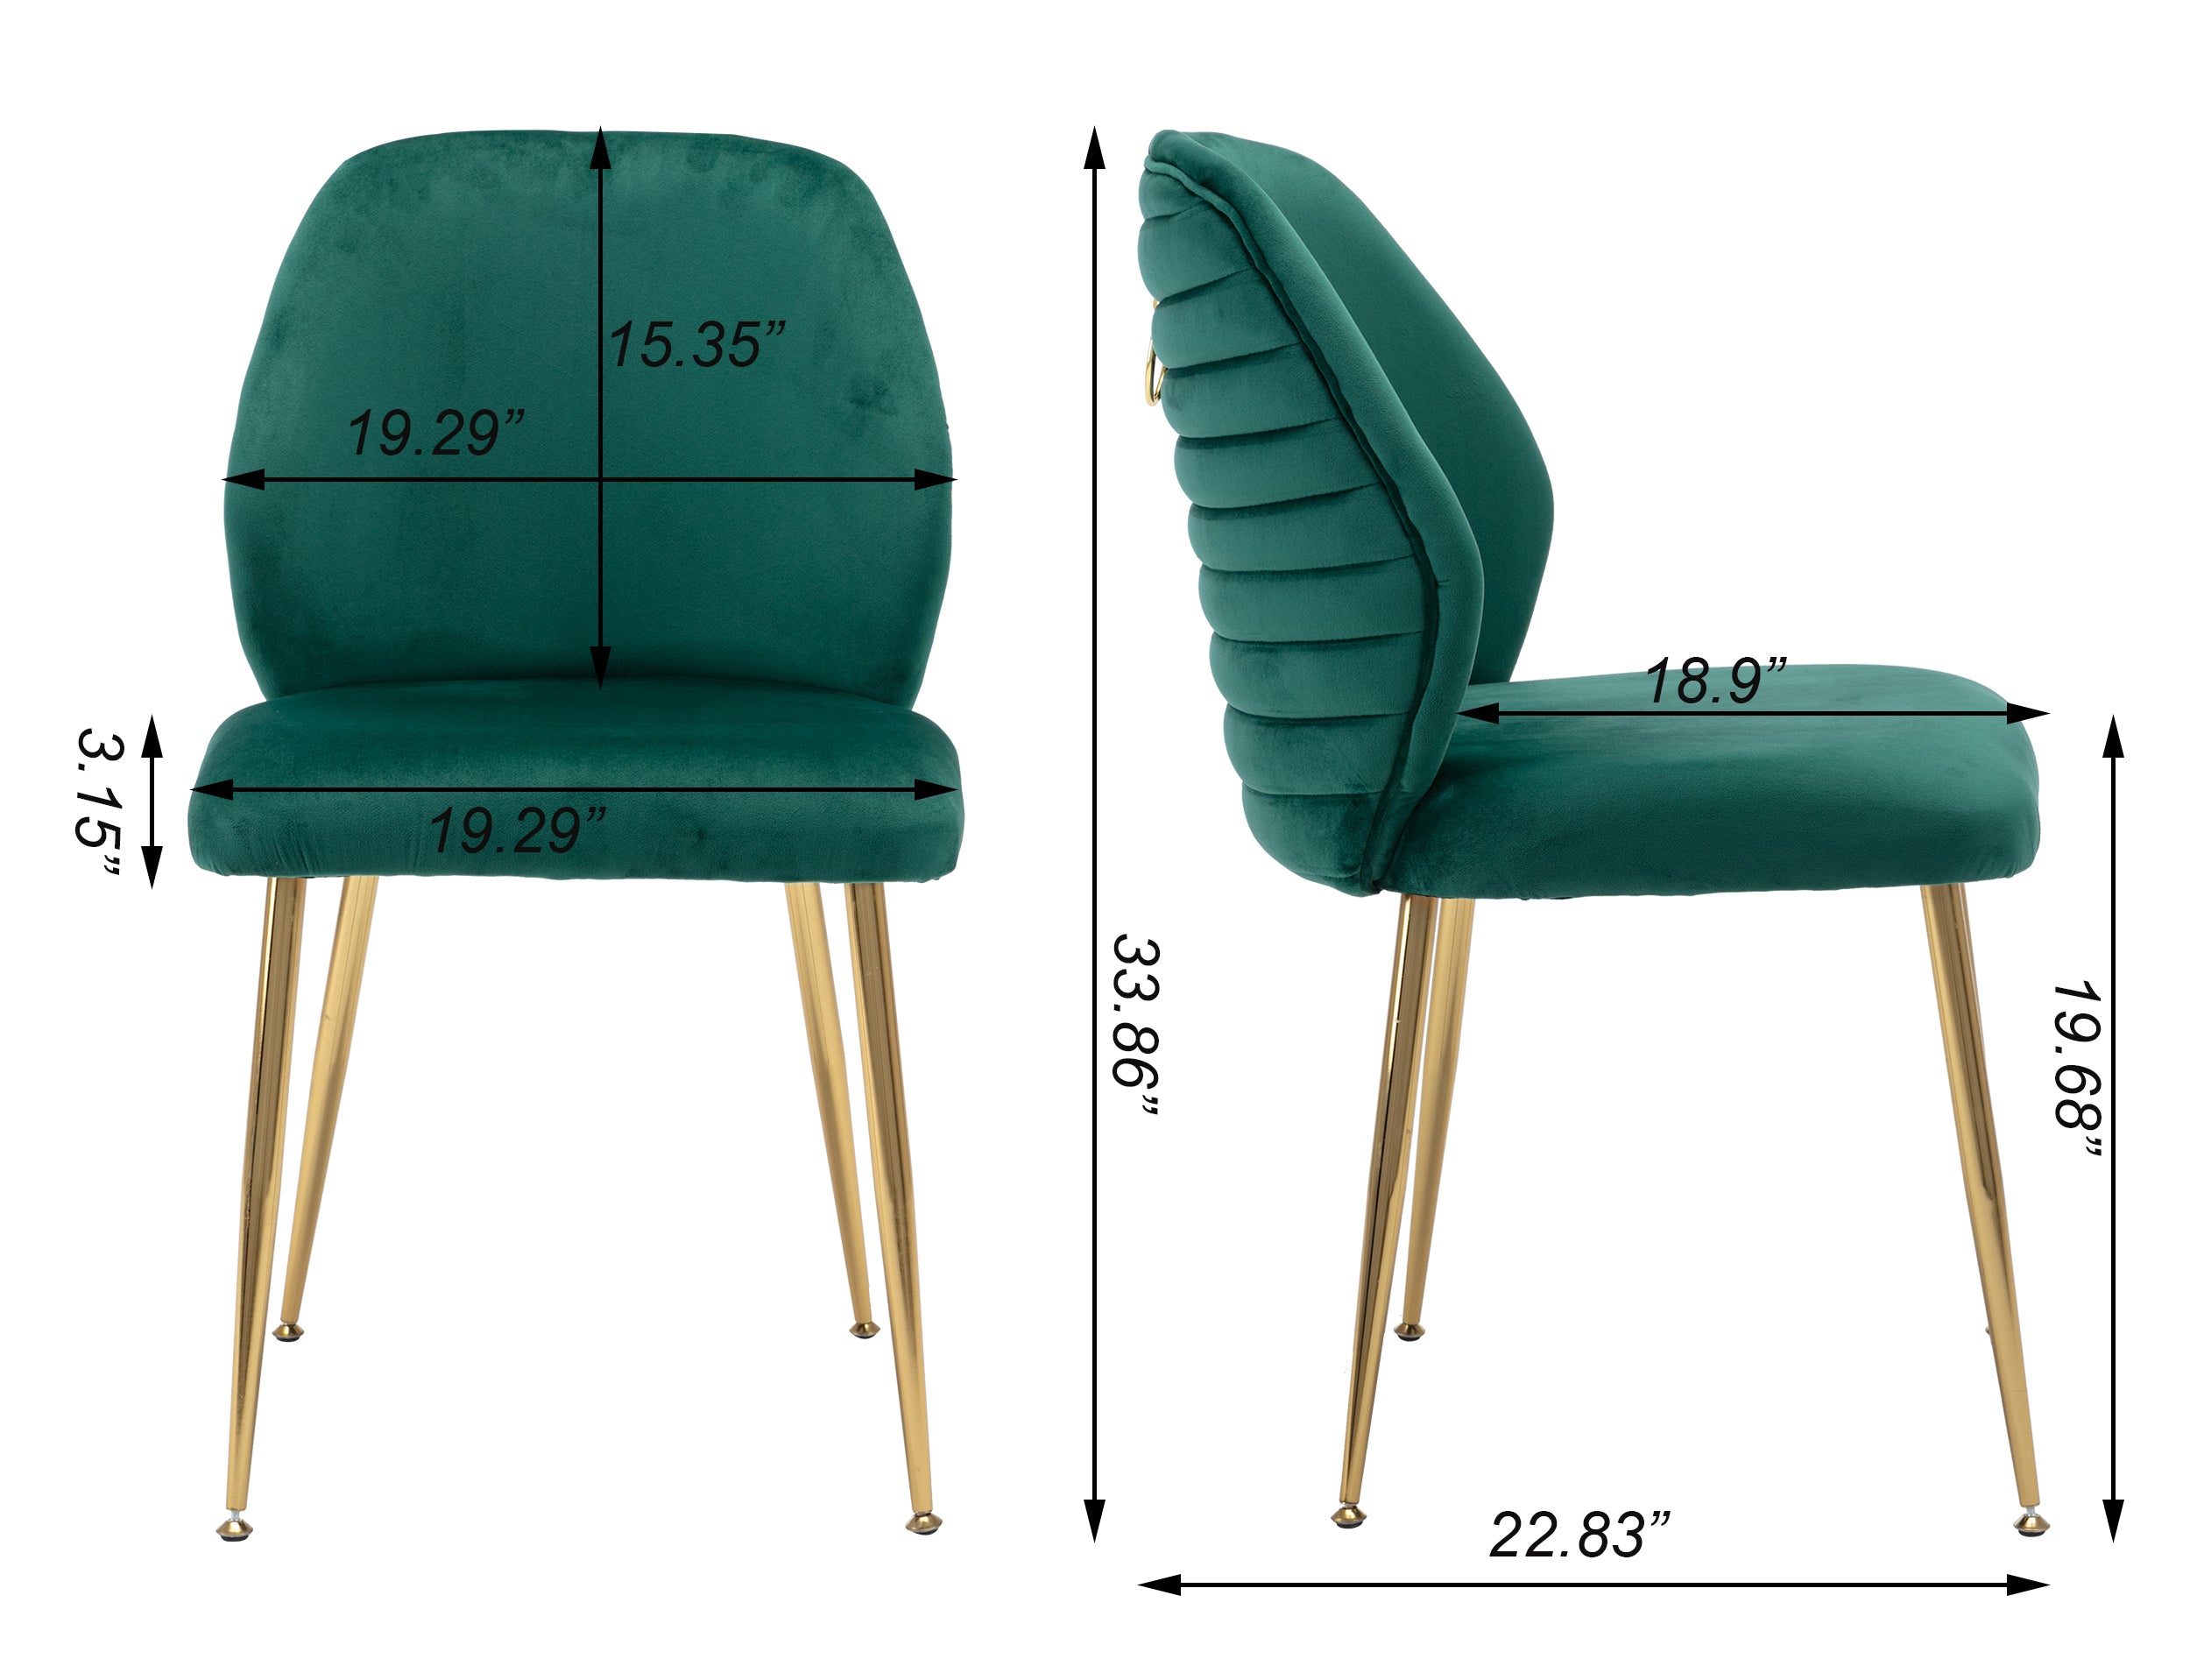 Modern Woven Velvet Upholstered Dining Chairs with Barrel Backrest and Gold Metal Legs (Set of 2) - Green